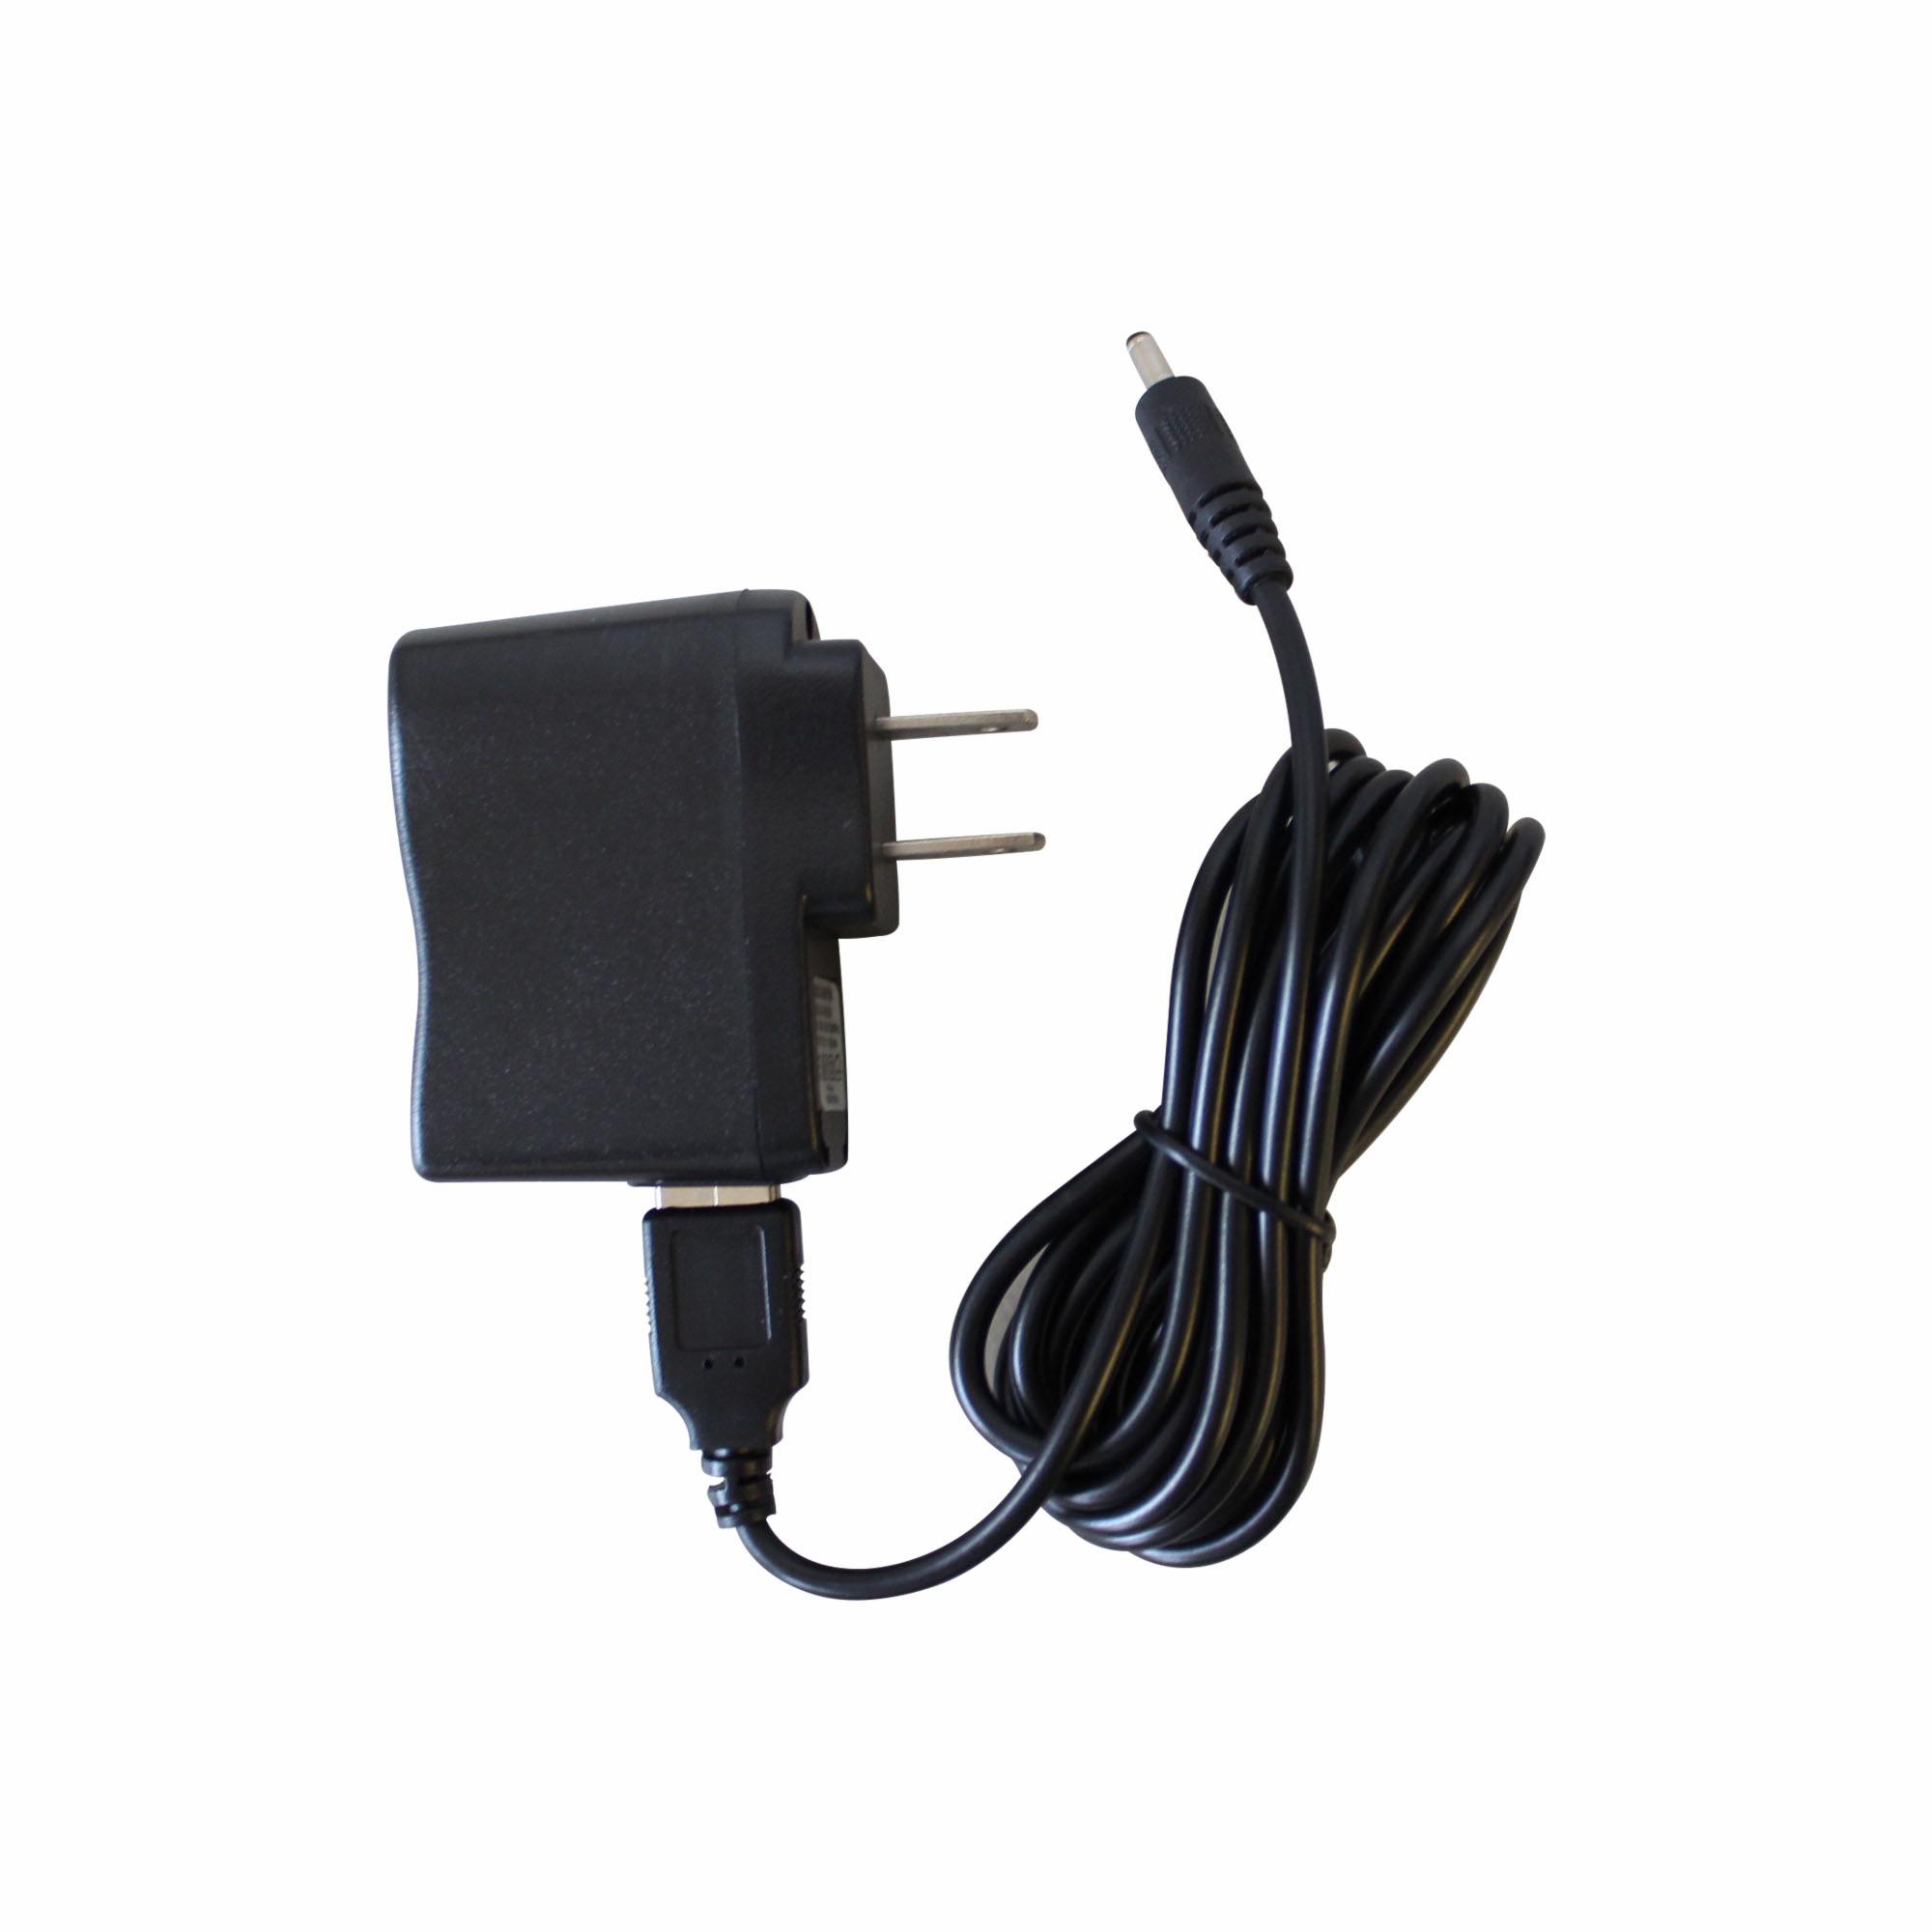 Power cord/charger